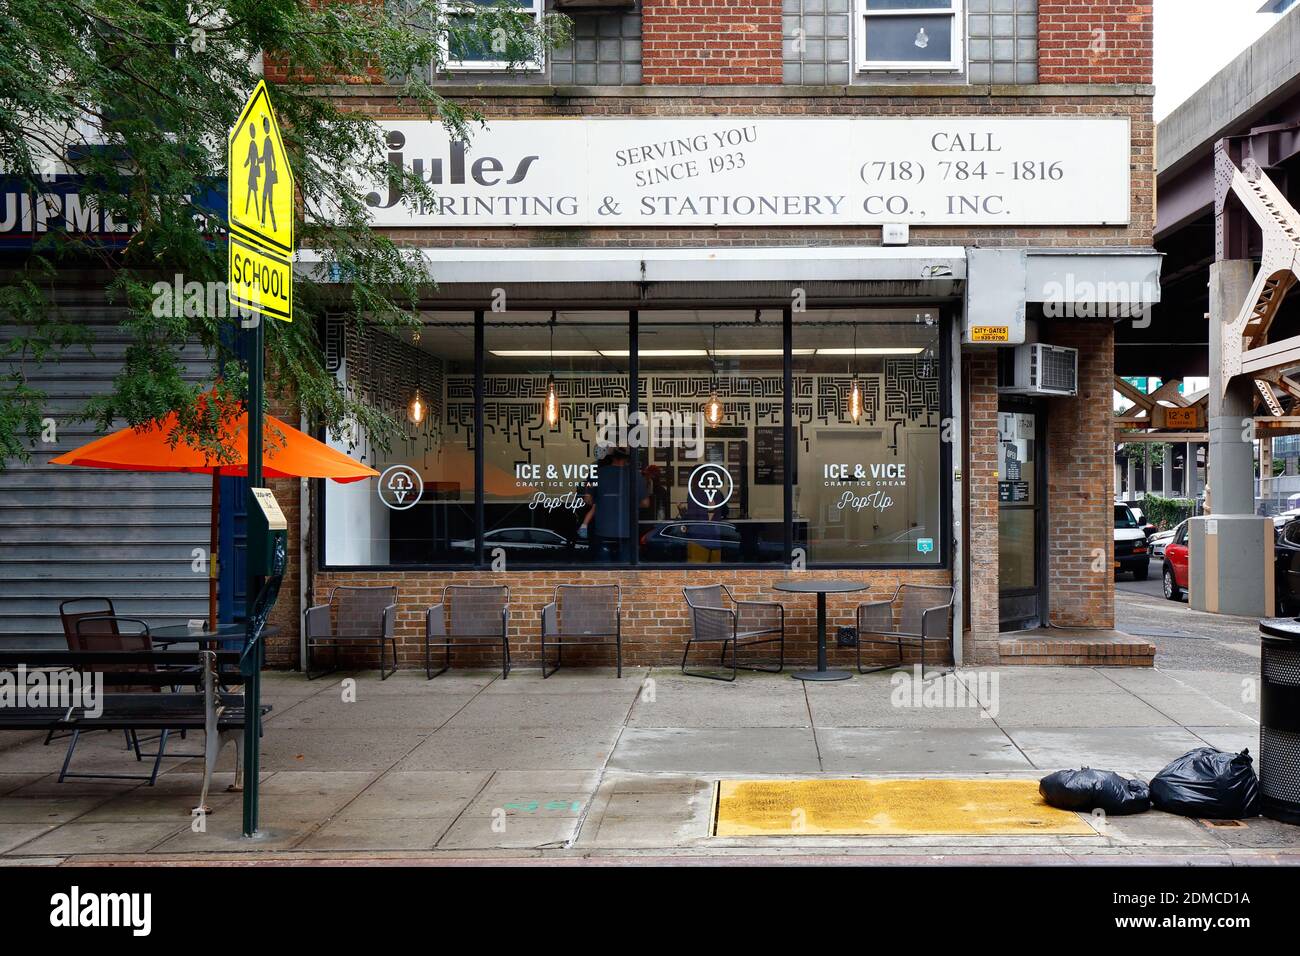 [historical storefront] Ice & Vice popup, 27-20 Jackson Ave, Long Island City, NY. exterior storefront of an ice cream shop. Stock Photo